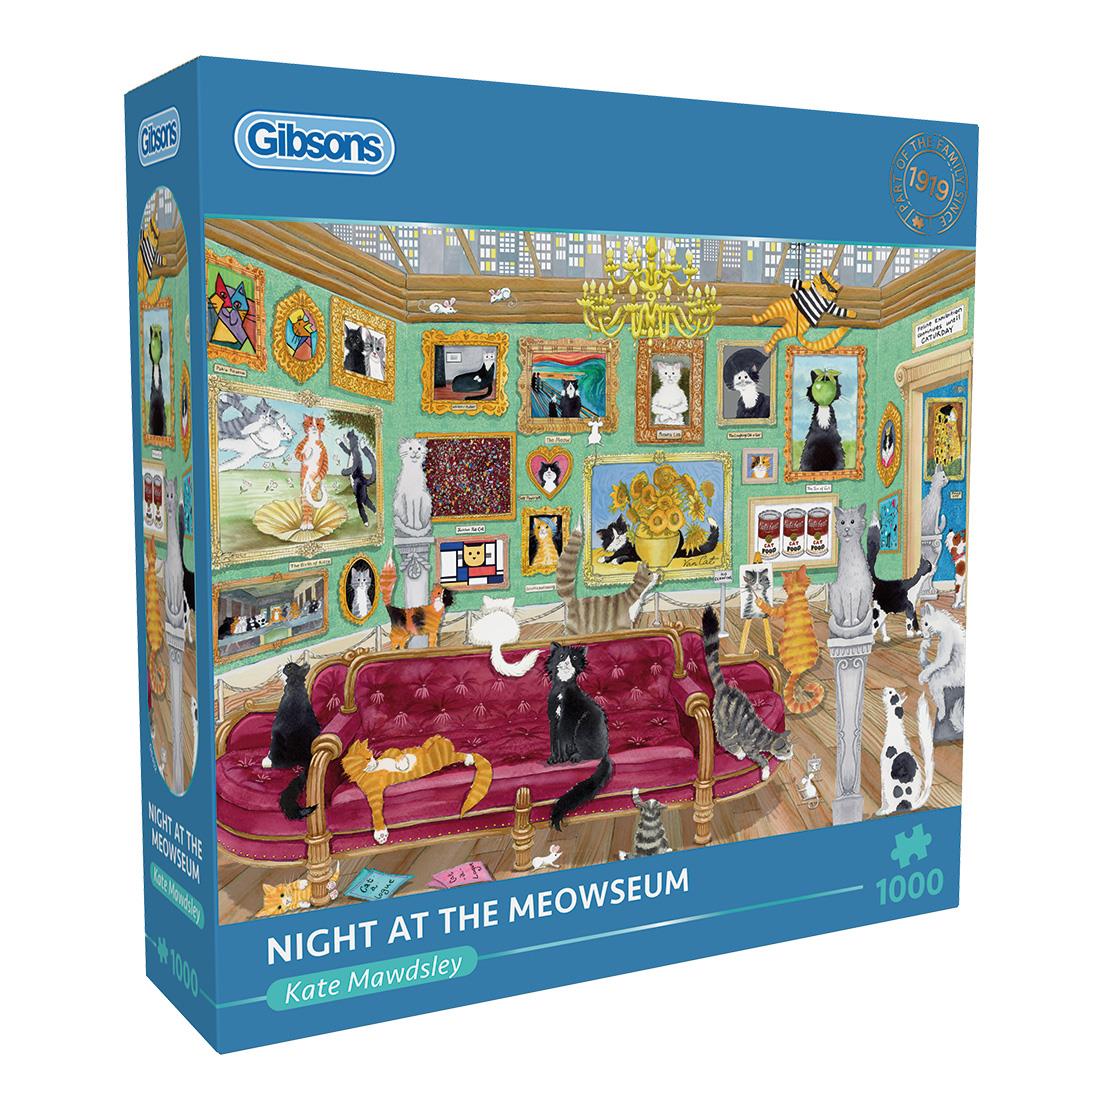 Night at the meowseum 1000 Piece Jigsaw Puzzle